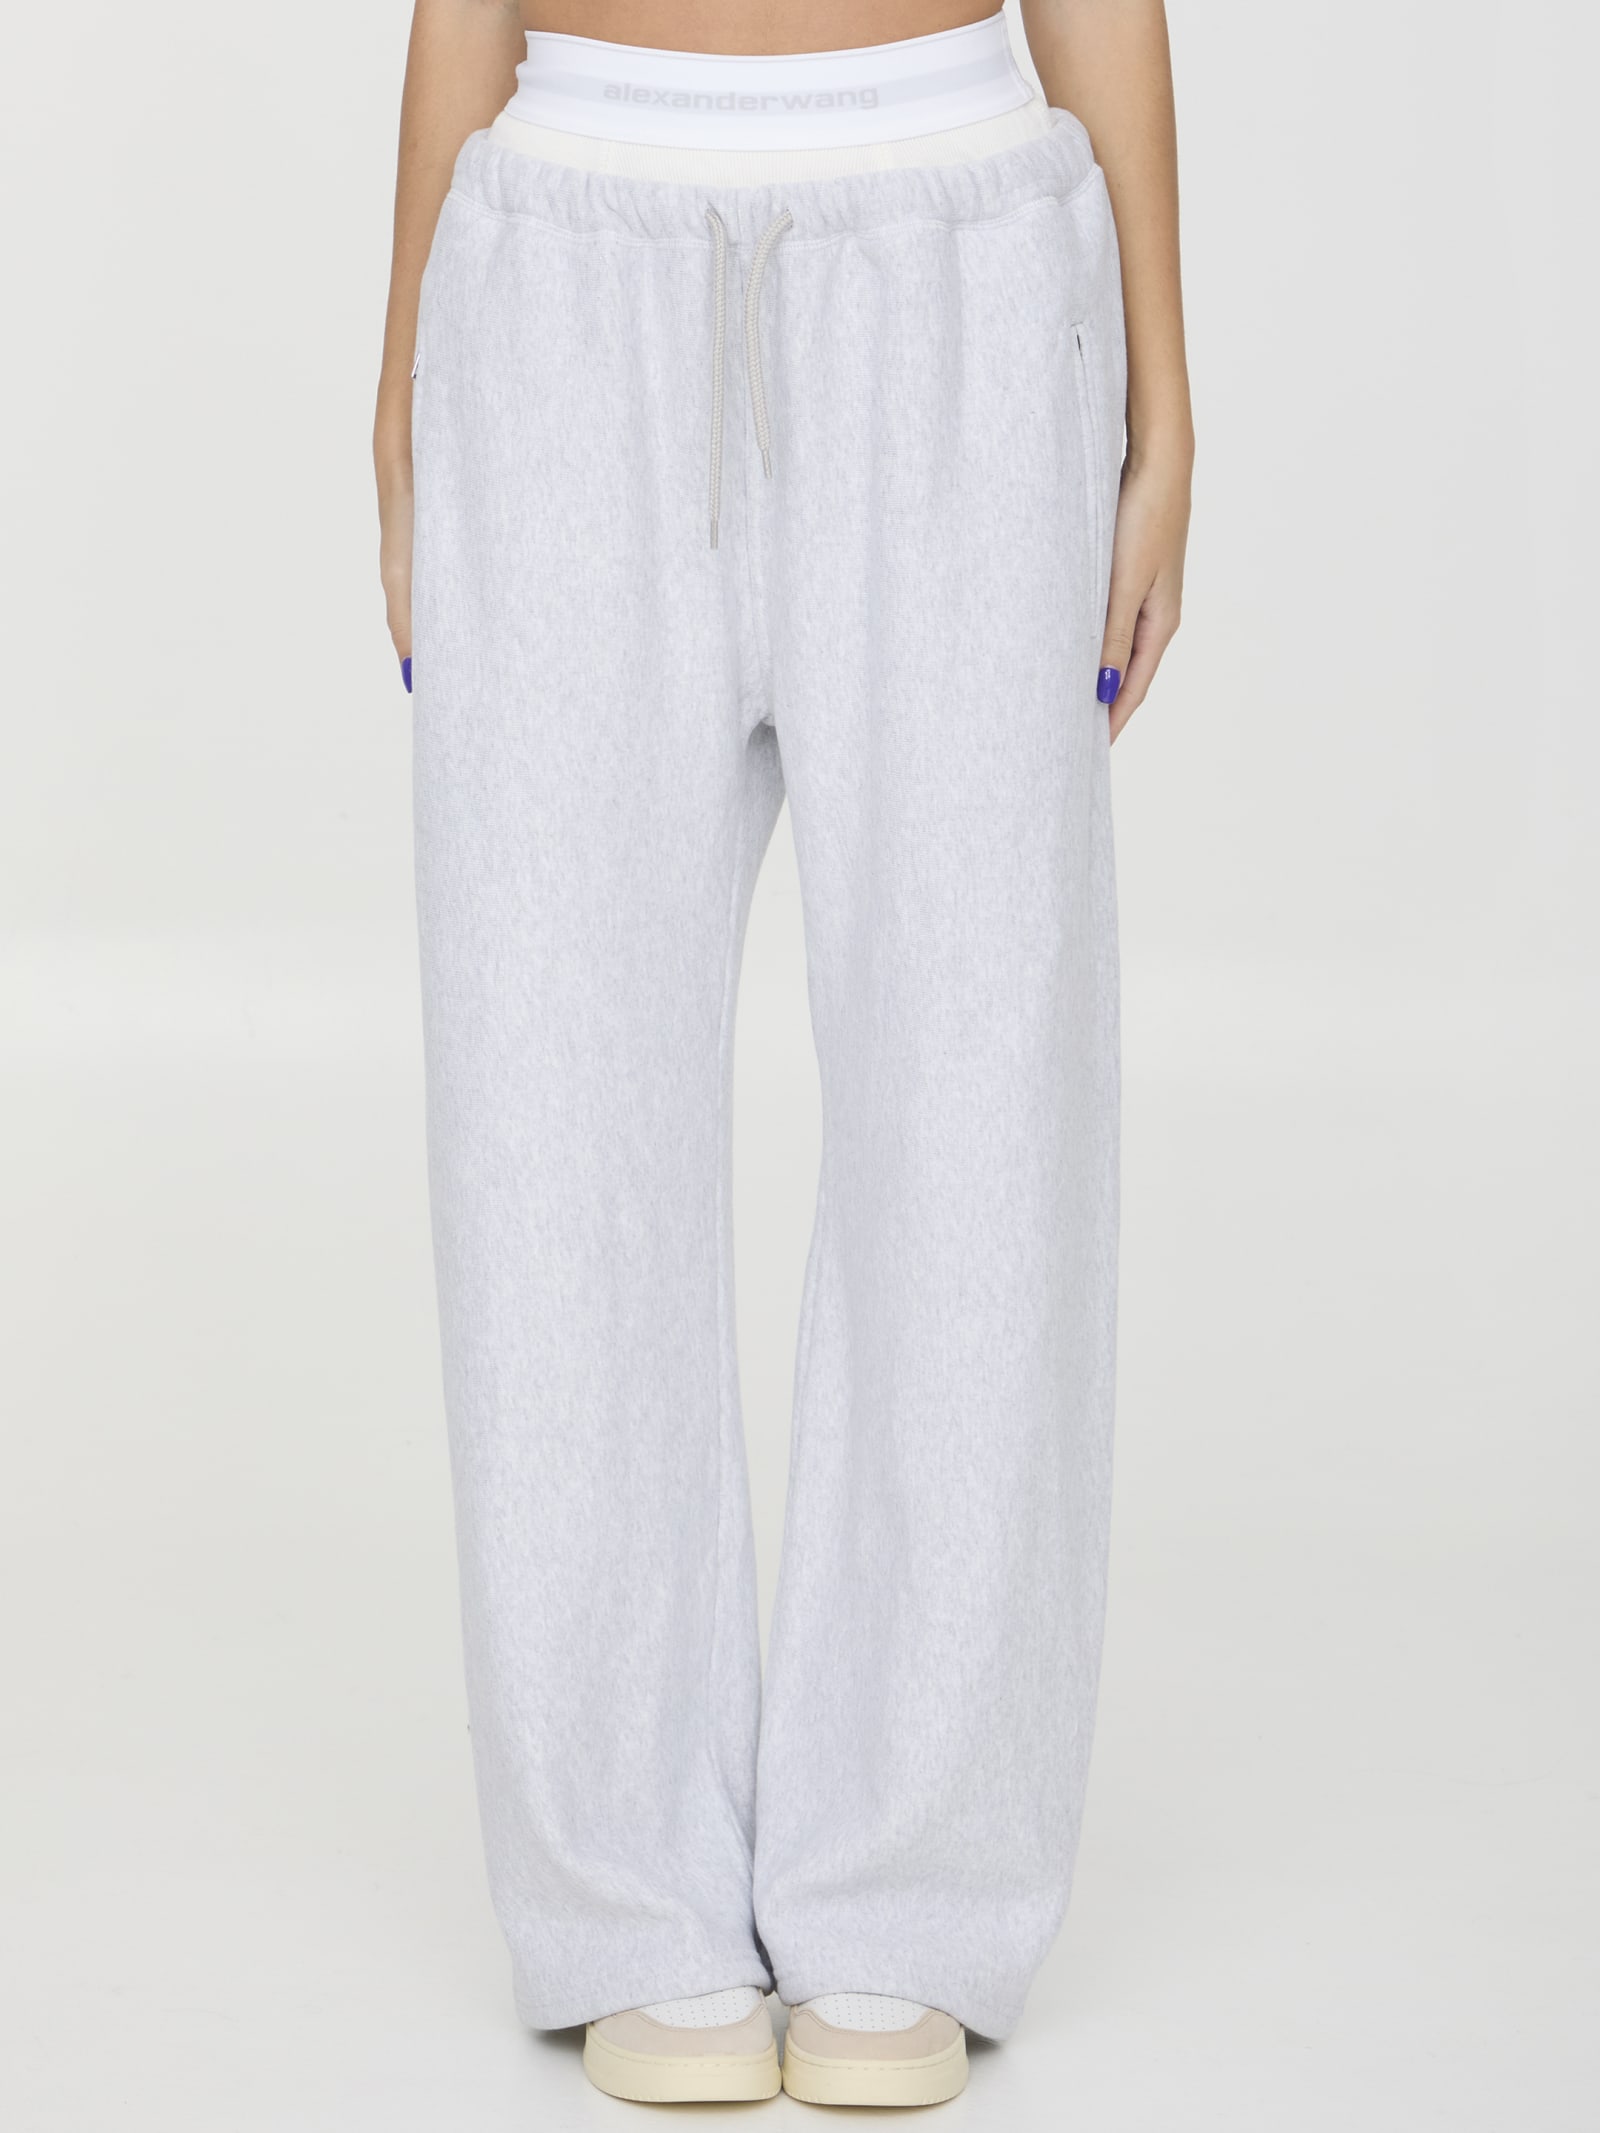 ALEXANDER WANG SWEATtrousers WITH BRIEF